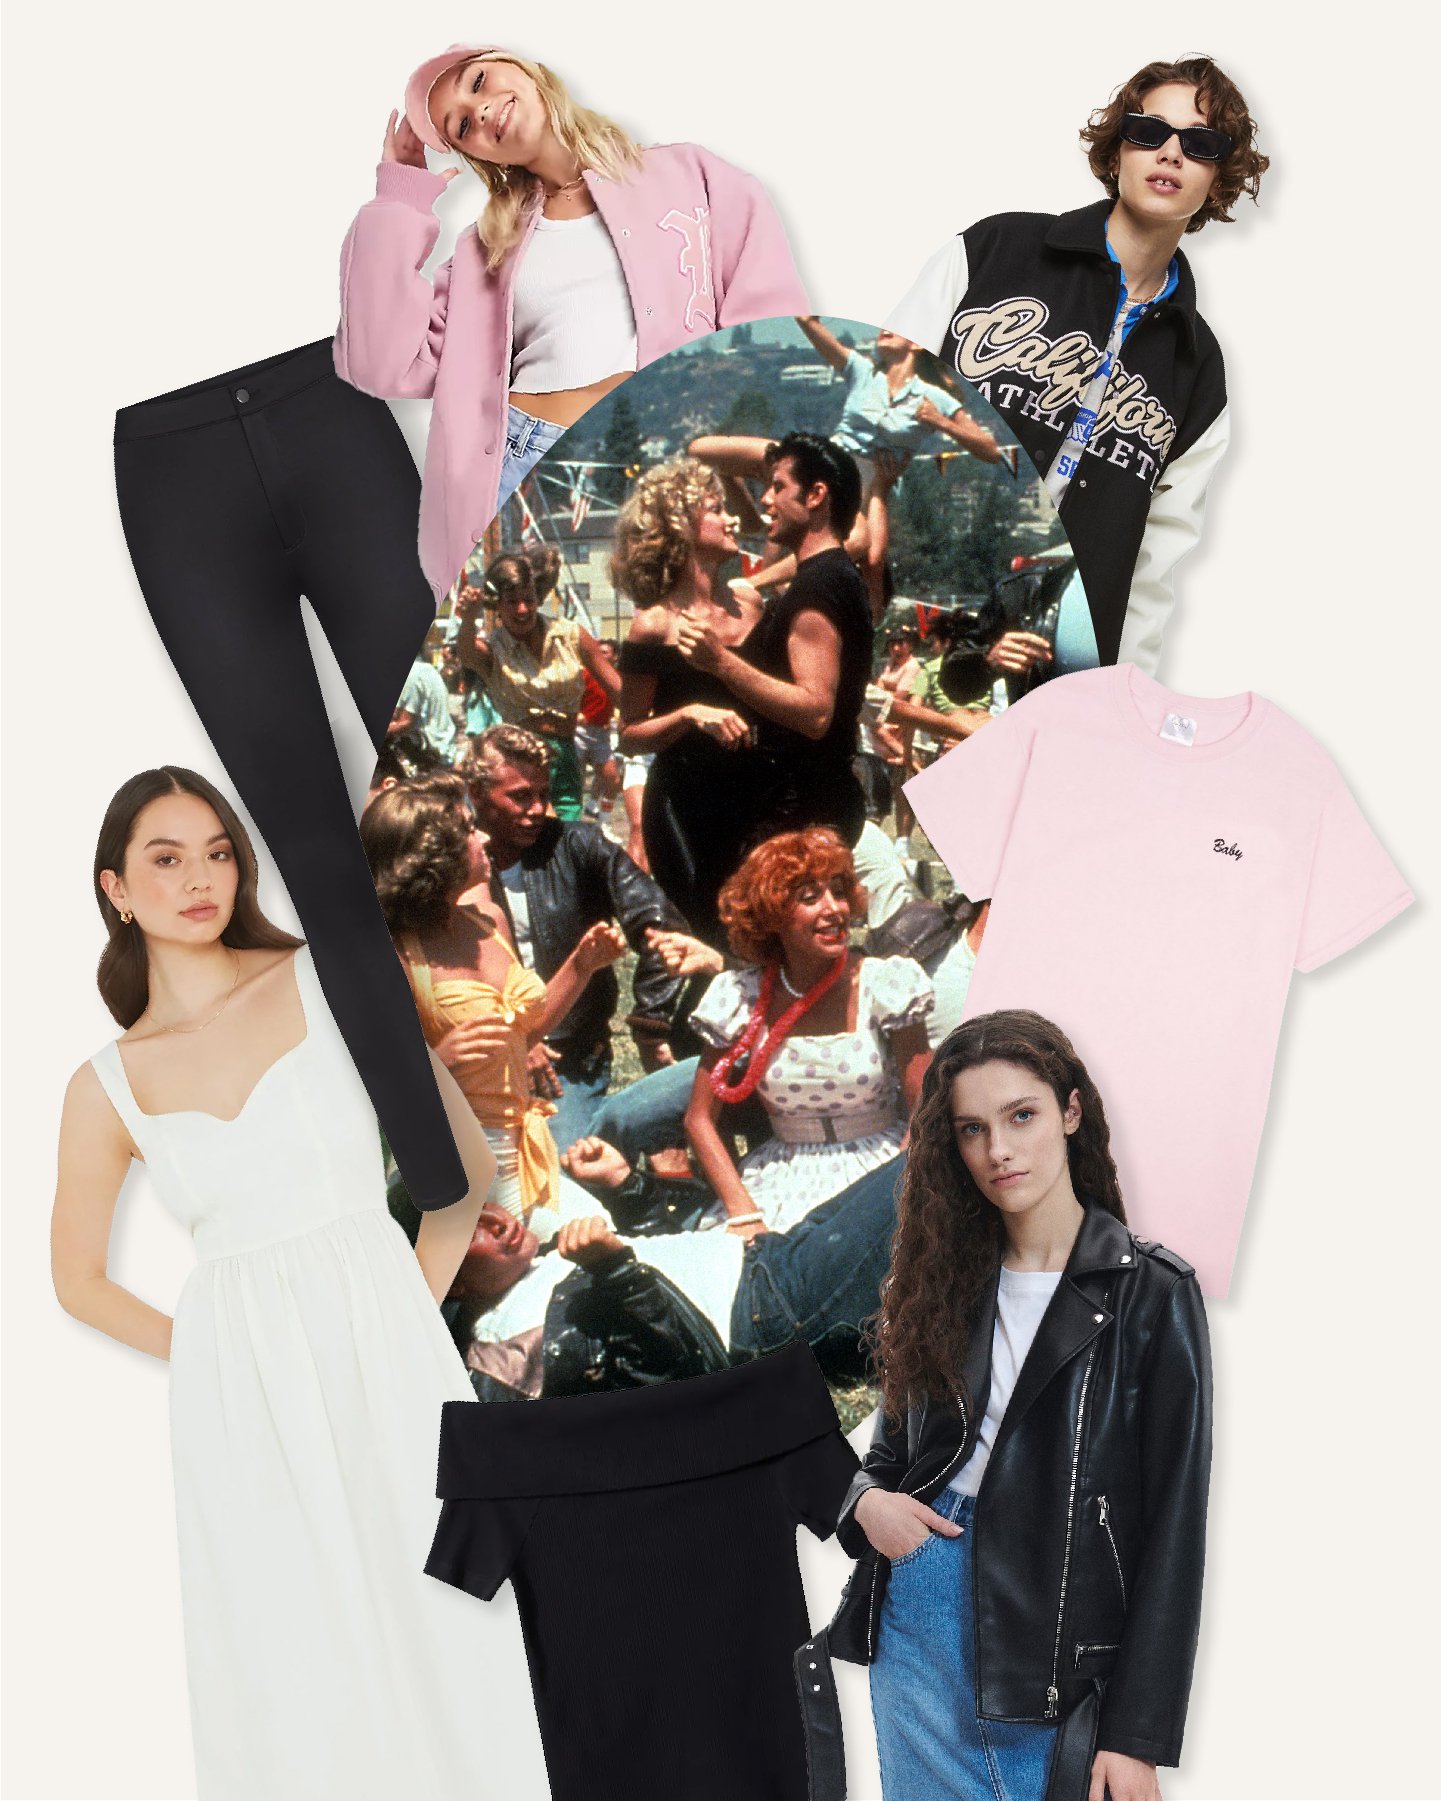 Pink Ladies Jacket and Grease Costumes from Grease Live